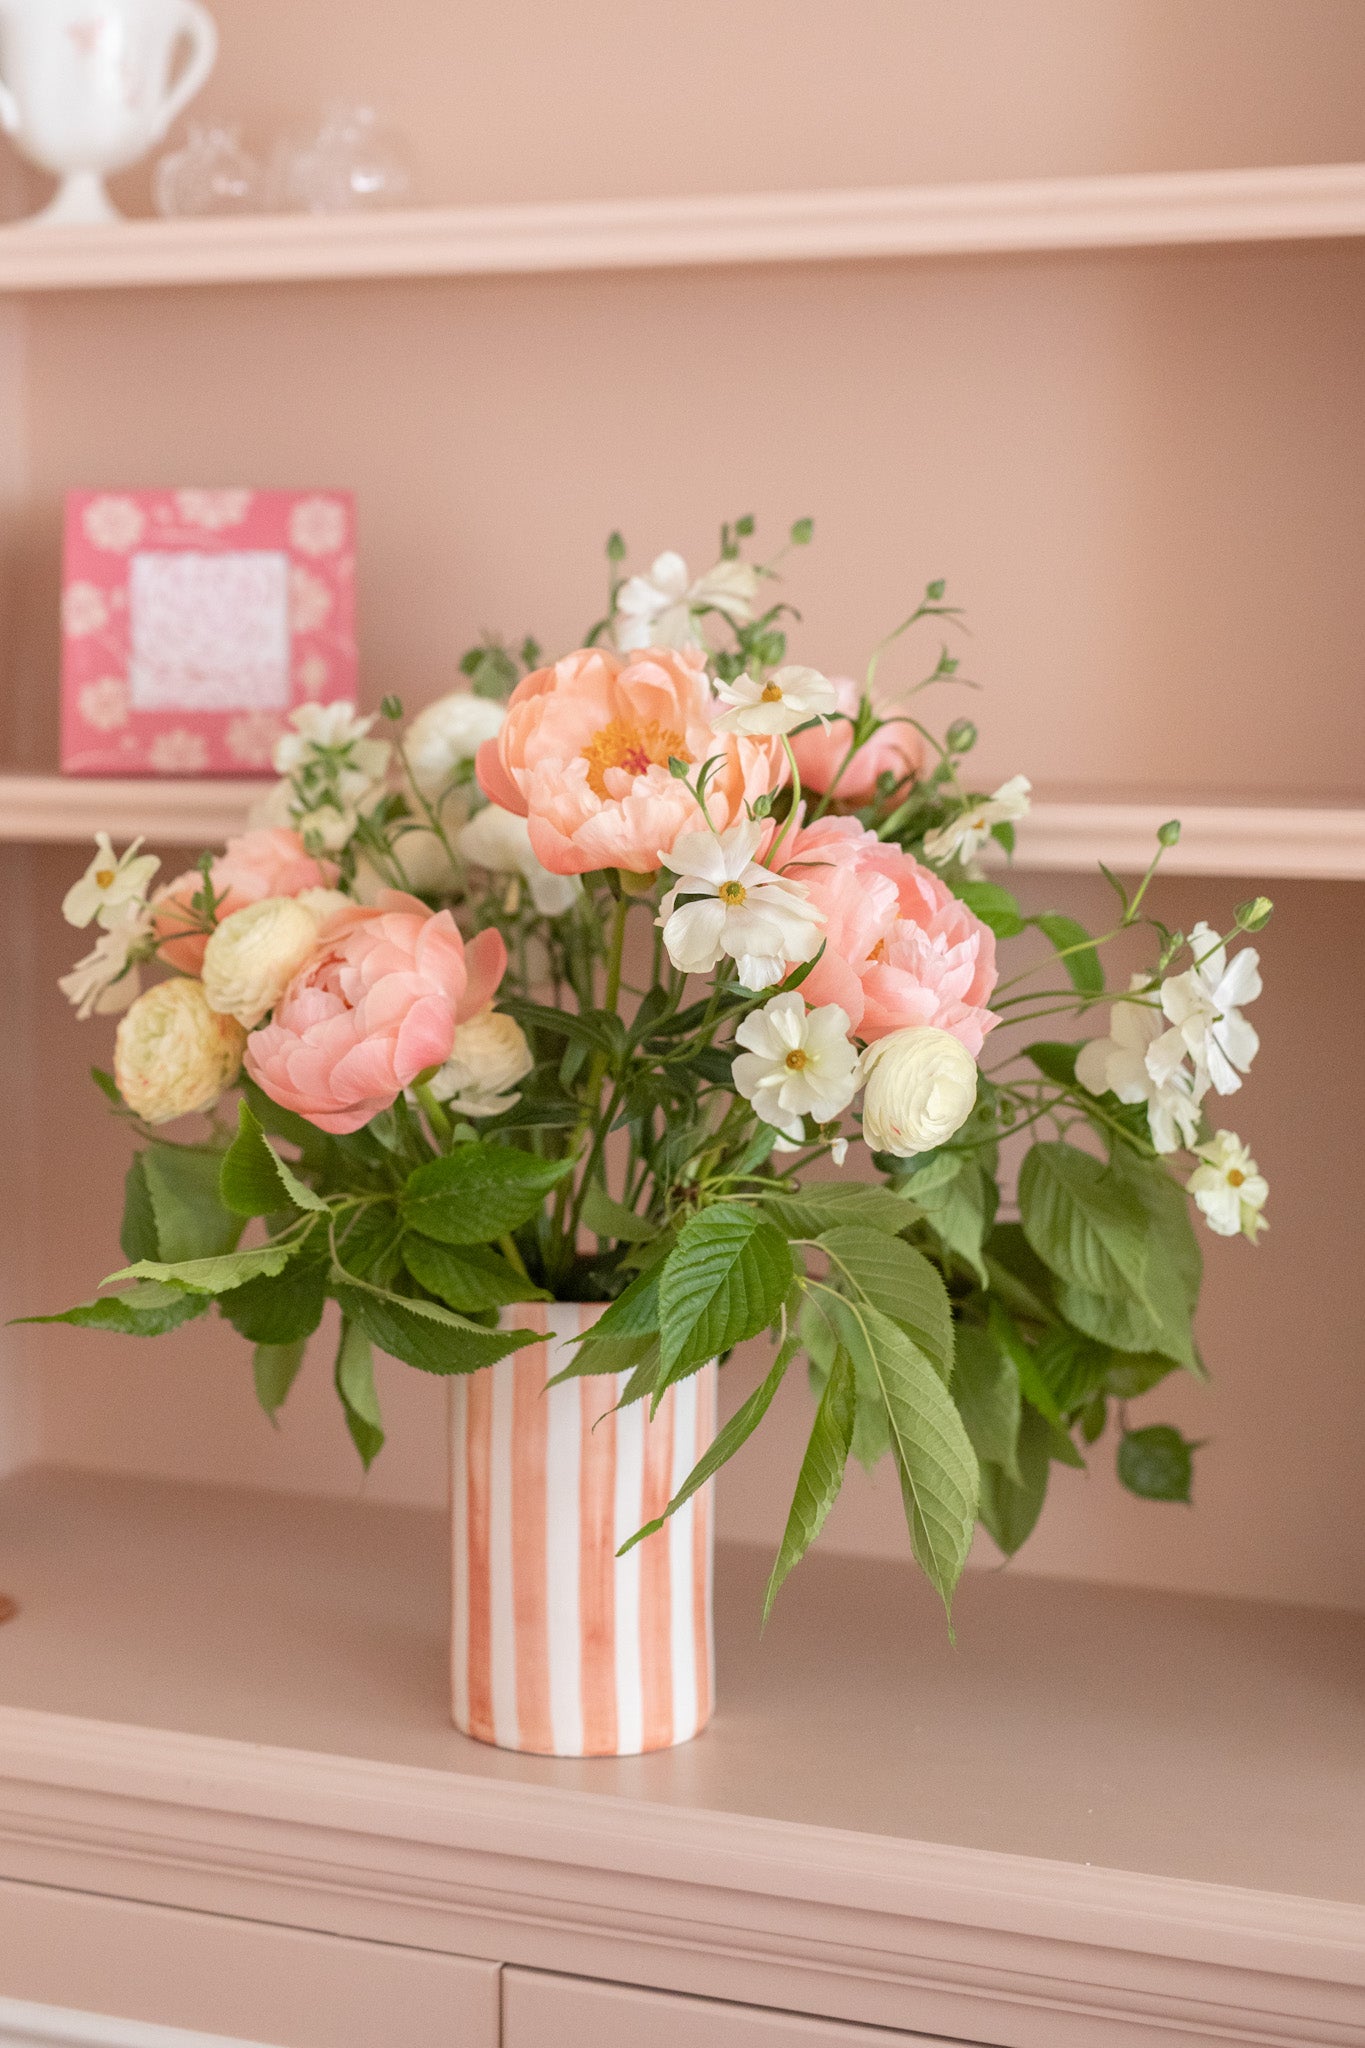 Striped terracotta and white vase with coral charm peonies